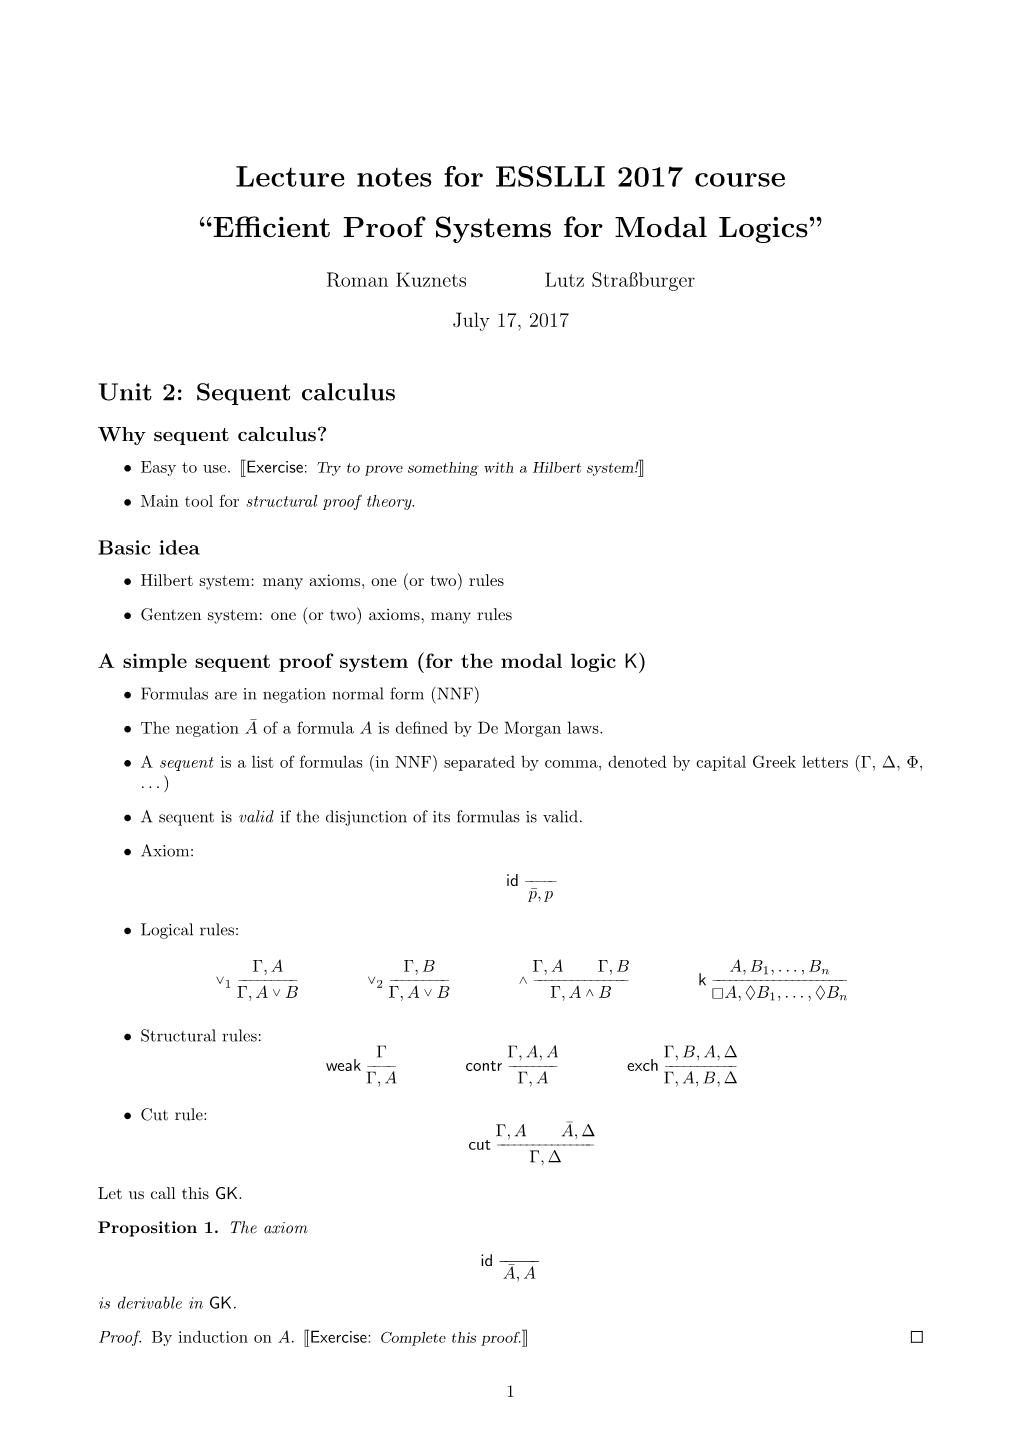 Efficient Proof Systems for Modal Logics